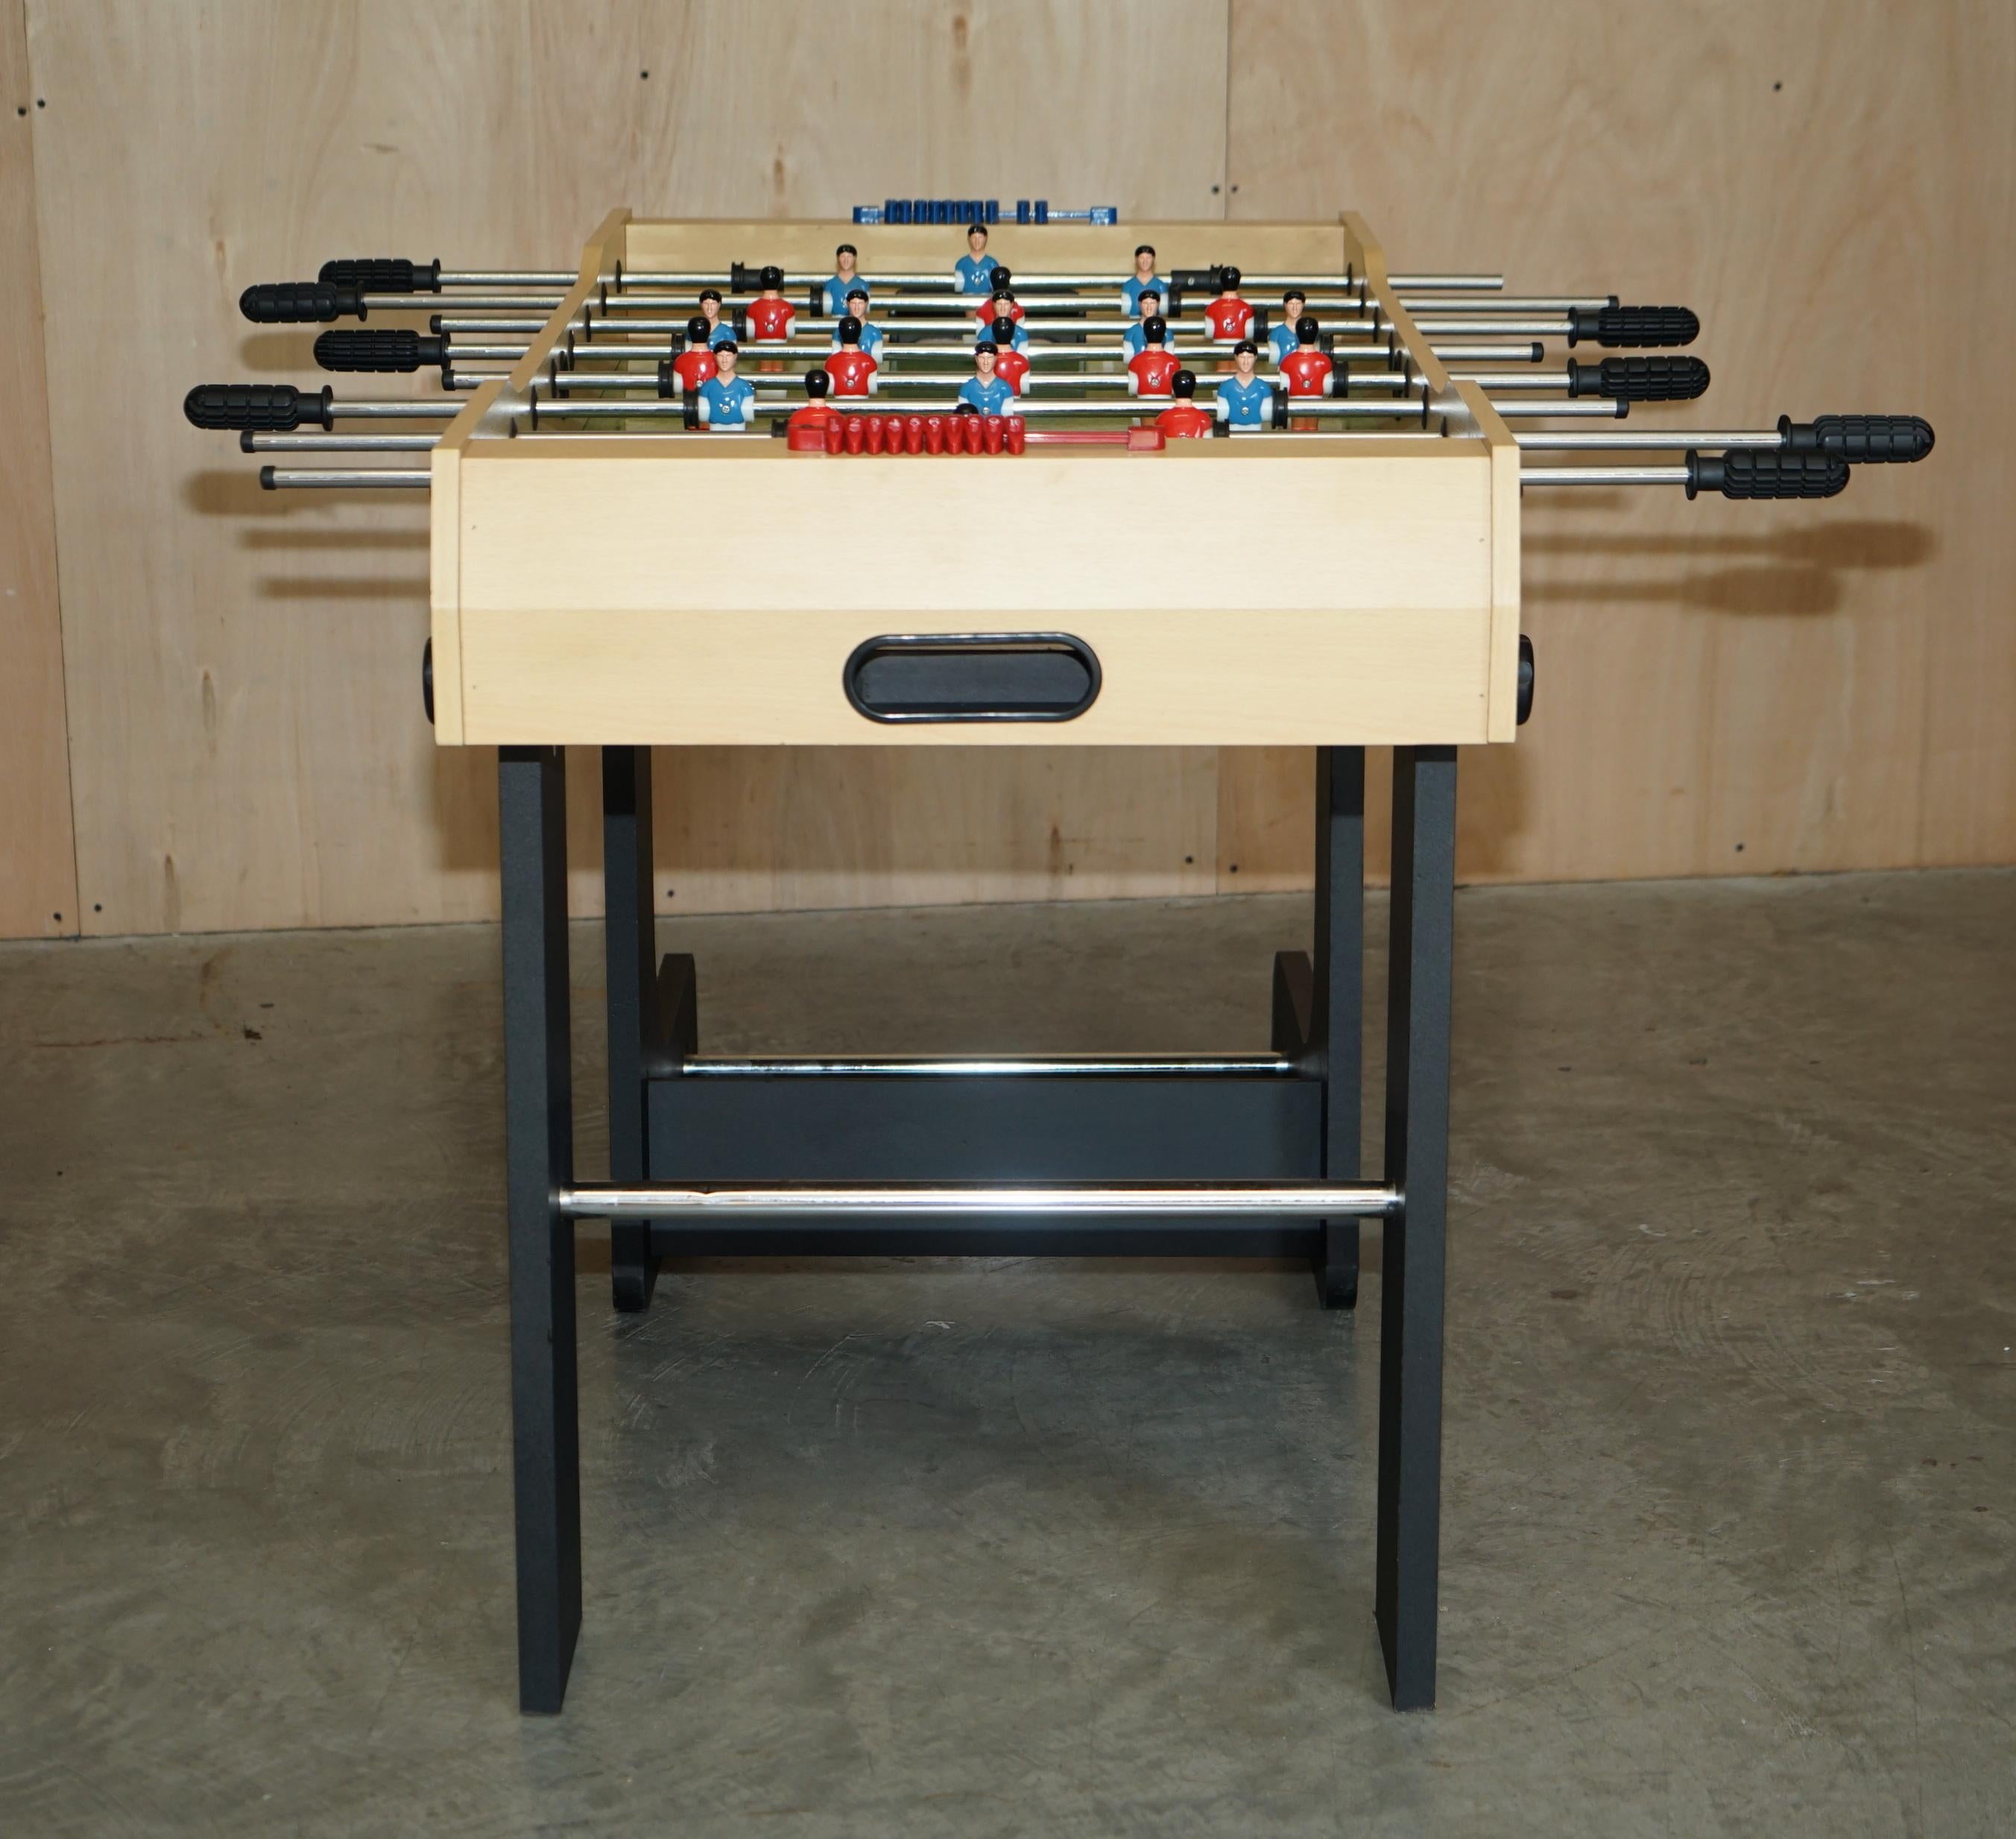 Table Football / Foosball That Folds Away for Ease of Storage Keep the Kids Busy 5